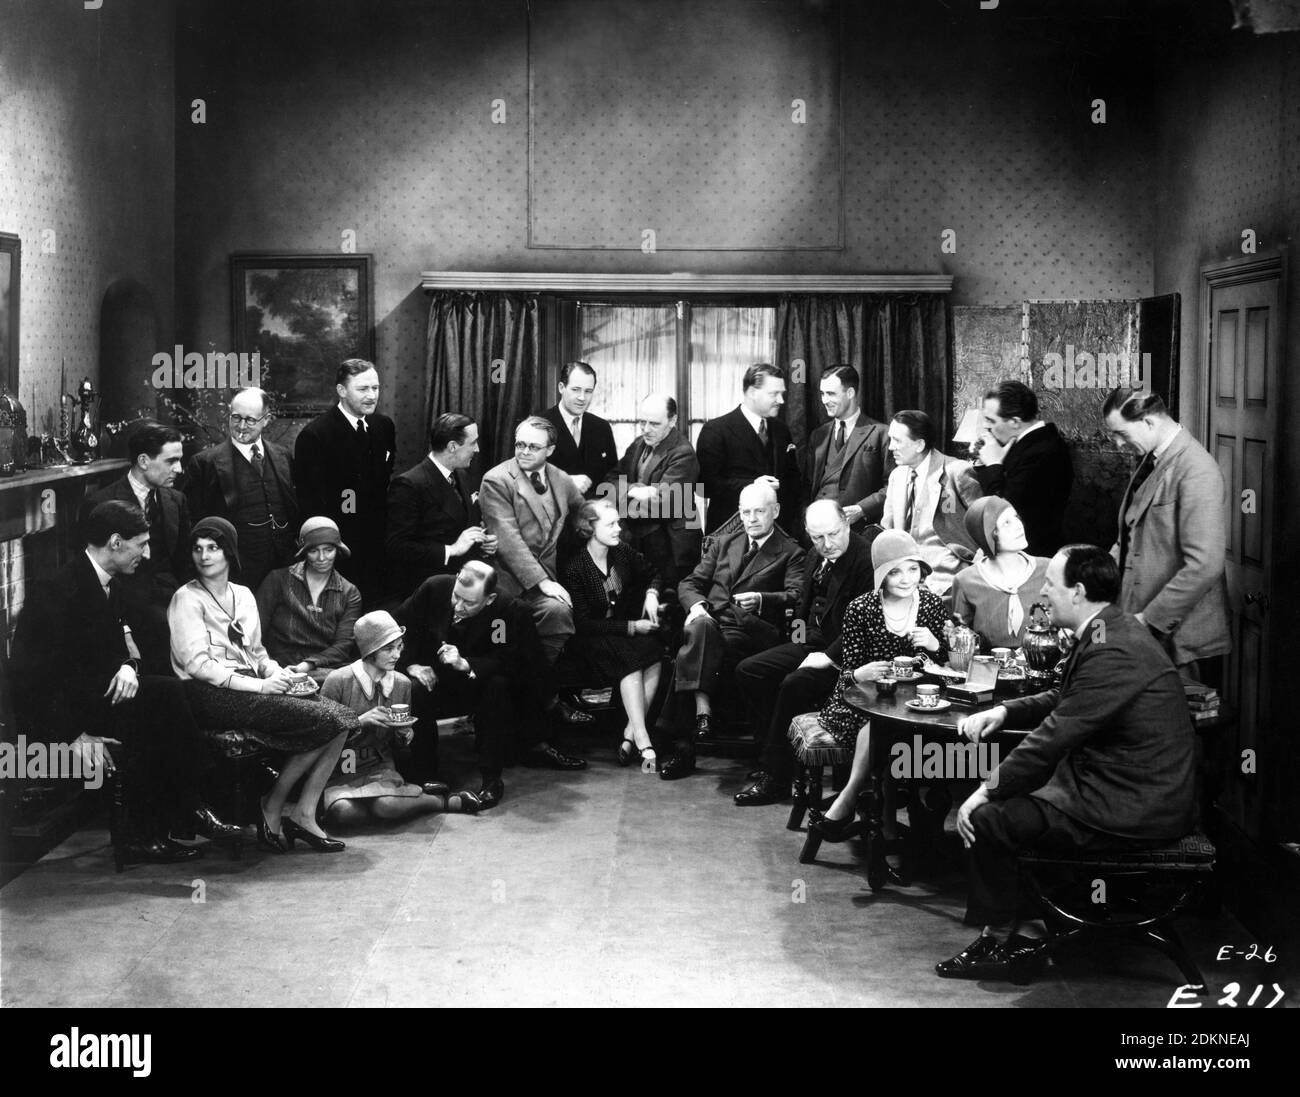 Author JOHN GALSWORTHY (sitting right of centre)visits Cast and Crew including HENRY WILCOXON JEAN CADELL MADELEINE CARROLL BASIL DEAN IAN HUNTER EDNA BEST NIGEL BRUCE AUSTIN TREVOR and GERALD du MAURIER and MABEL POULTON at British Lion Studios Beaconsfield during filming of ESCAPE ! 1930 director BASIL DEAN play John Galsworthy producer Basil Dean Associated Radio Pictures (ARP) / Associated Talking Pictures (ATP) Stock Photo